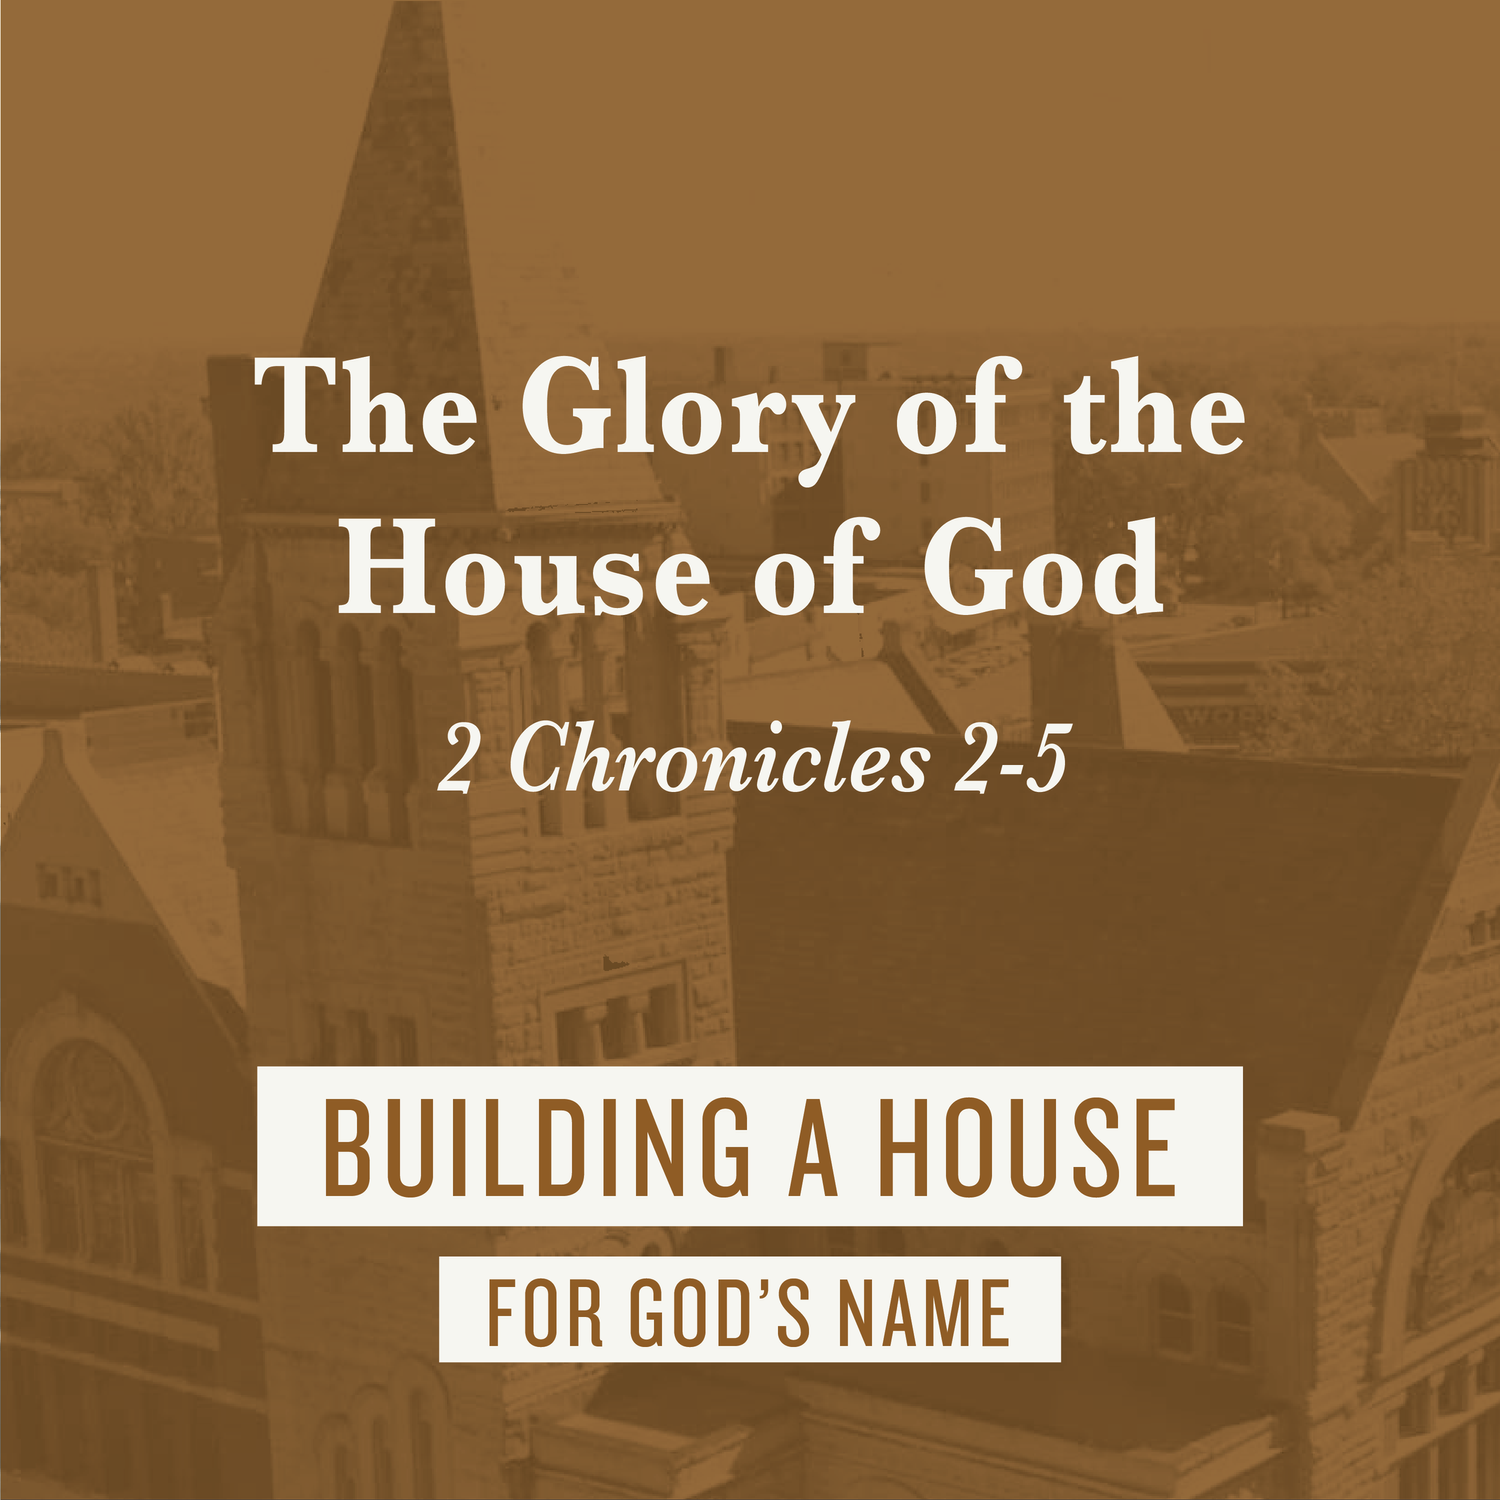 The Glory of the House of God